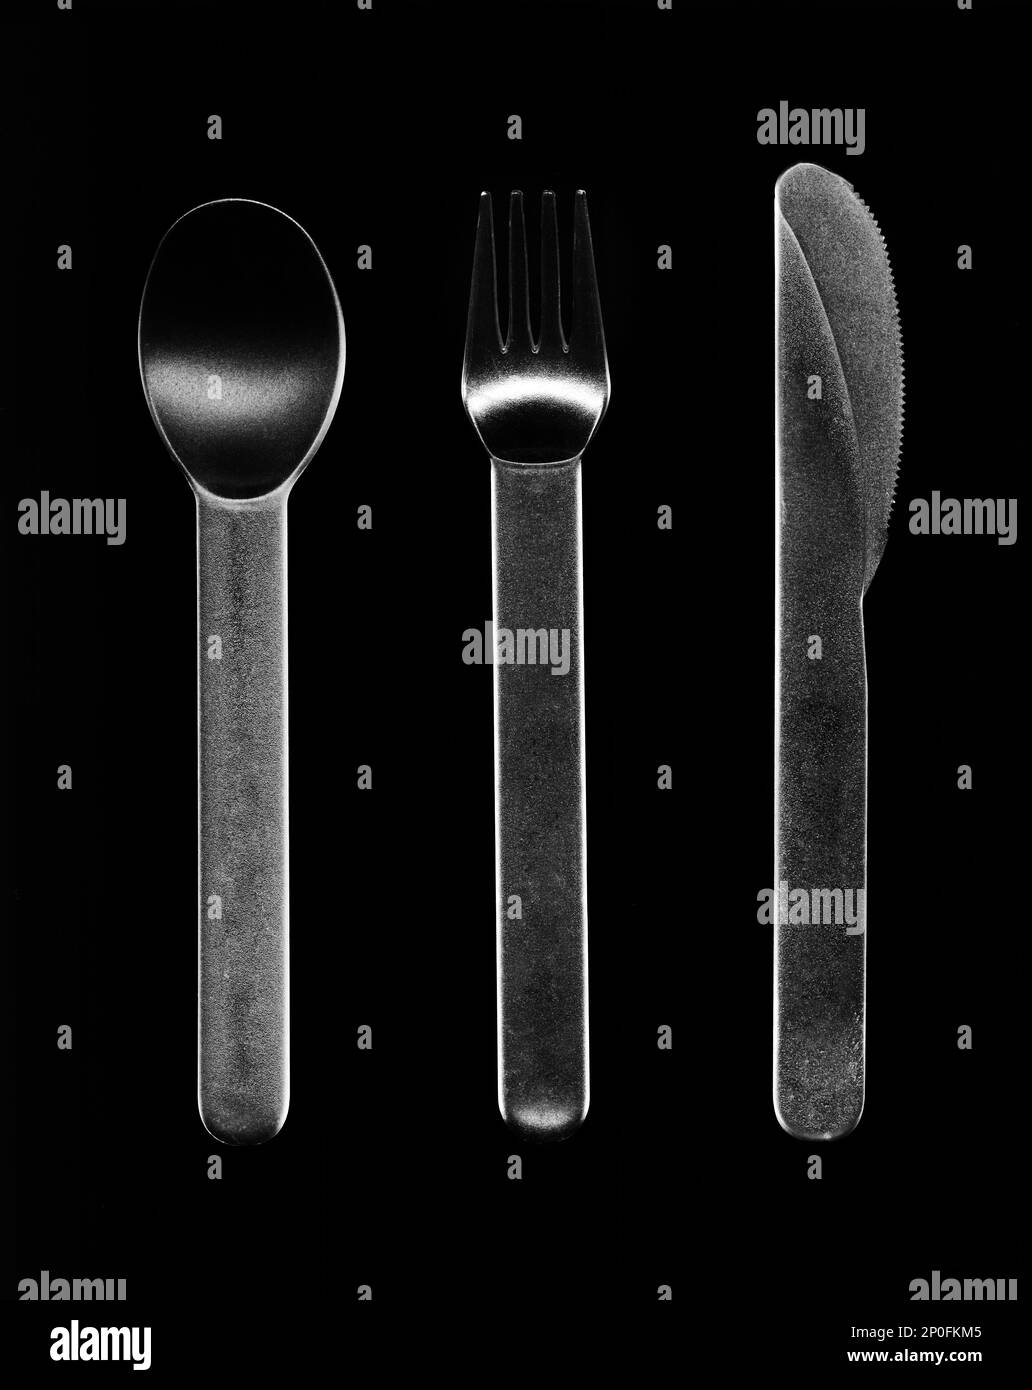 Cheap plastic cutlery set isolated on black. Disposable clear silverware -  knife, spoon and fork arranged in a row. Eating utensils Stock Photo